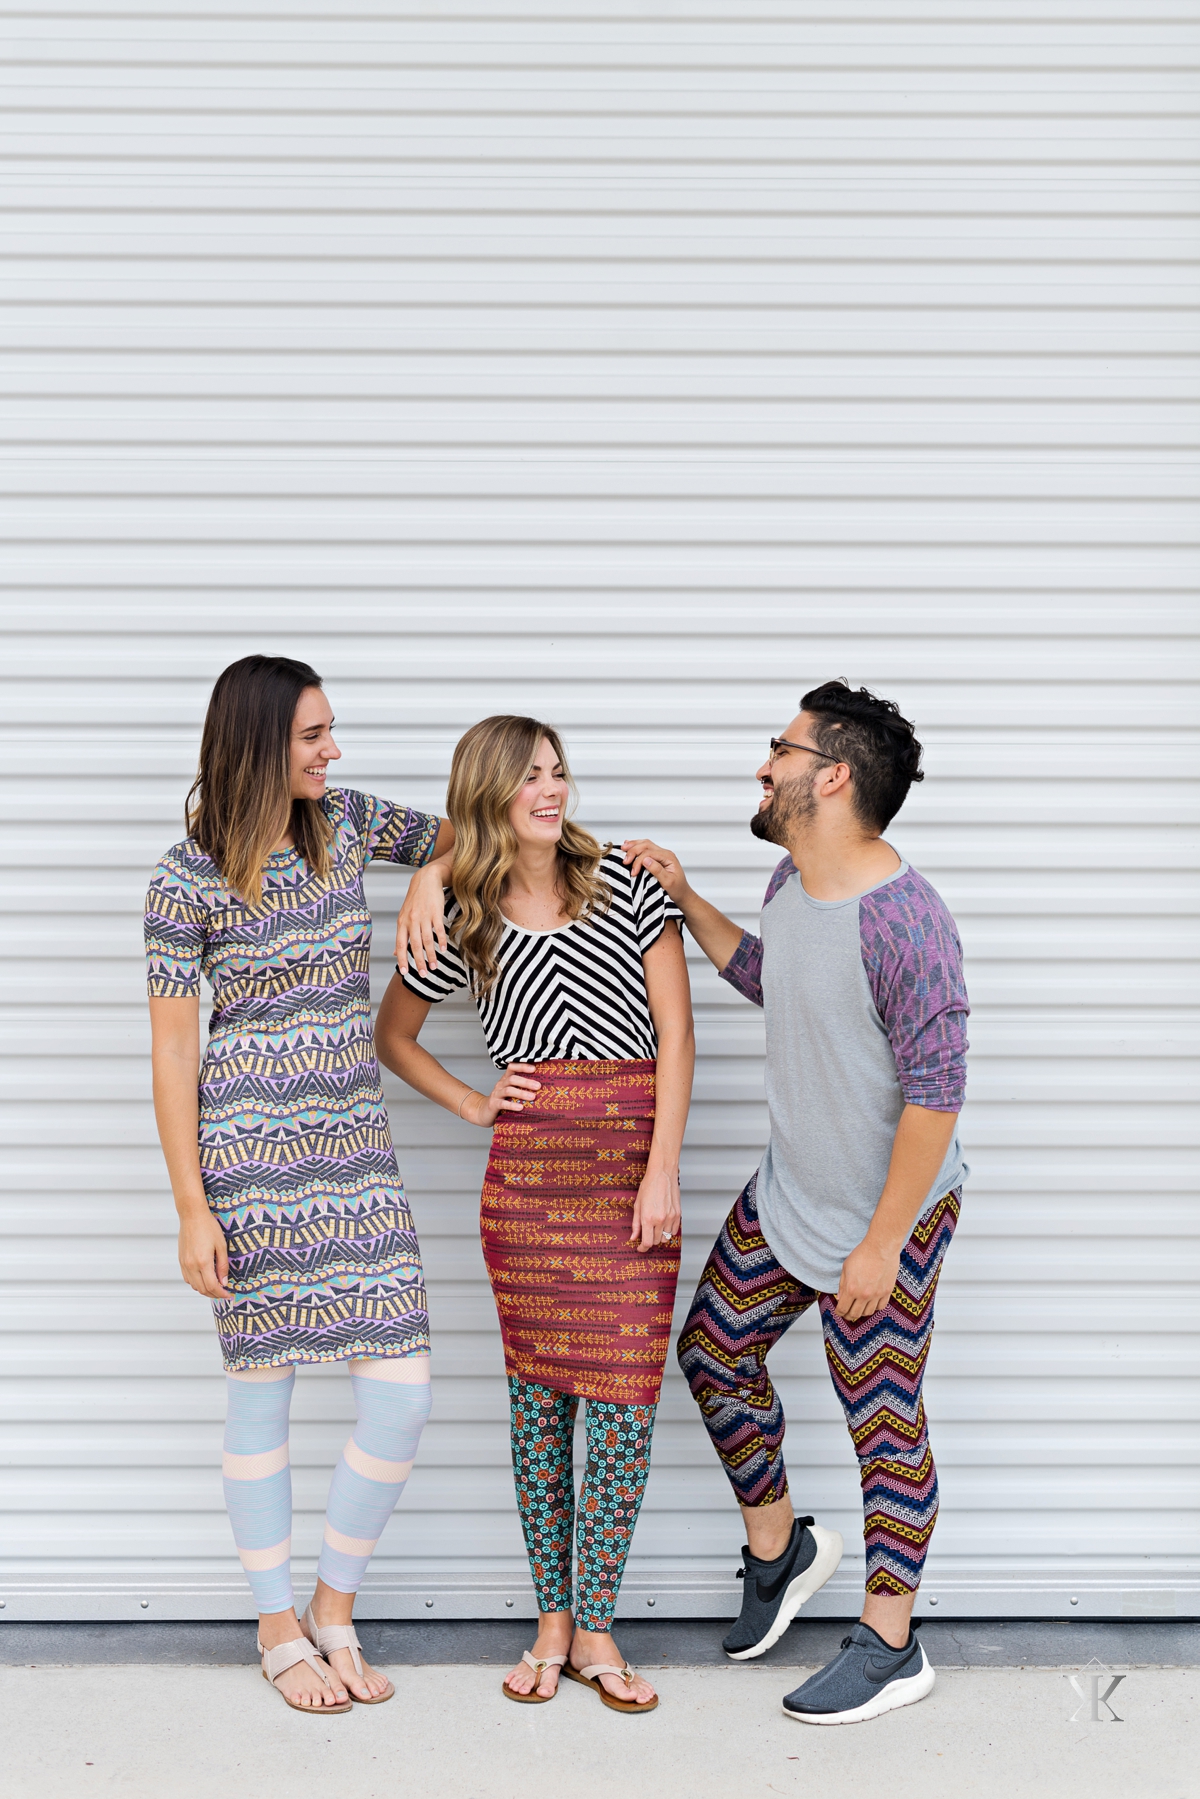 Is LuLaRoe Worth the Hype? LuLaRoe Review and Giveaway